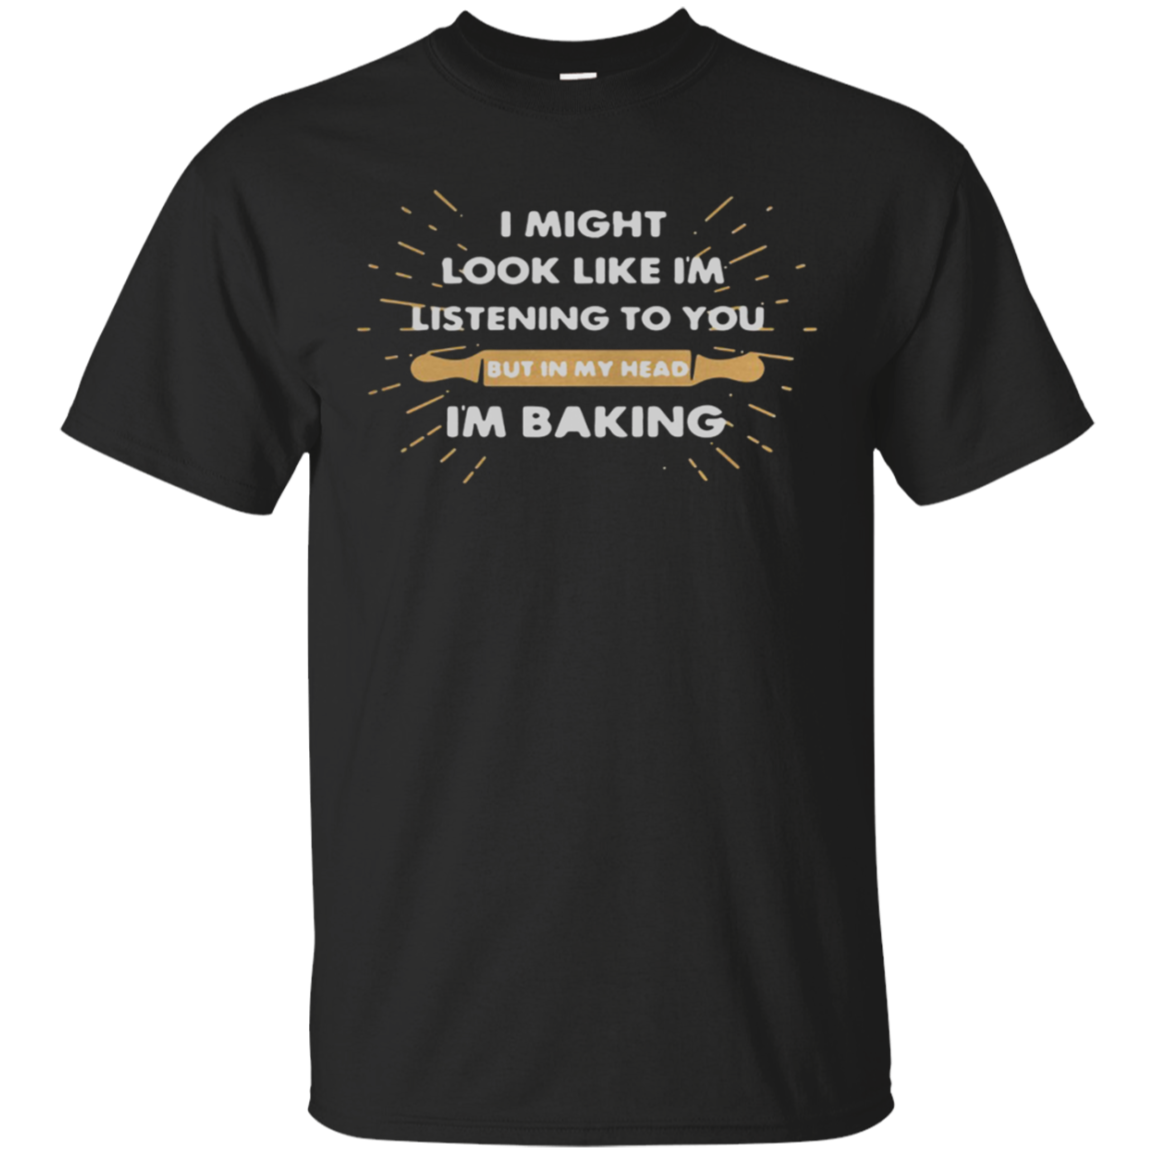 I Might Look Like Iâ™m Listening To You But In My Head Iâ™m Baking Shirt Shirt